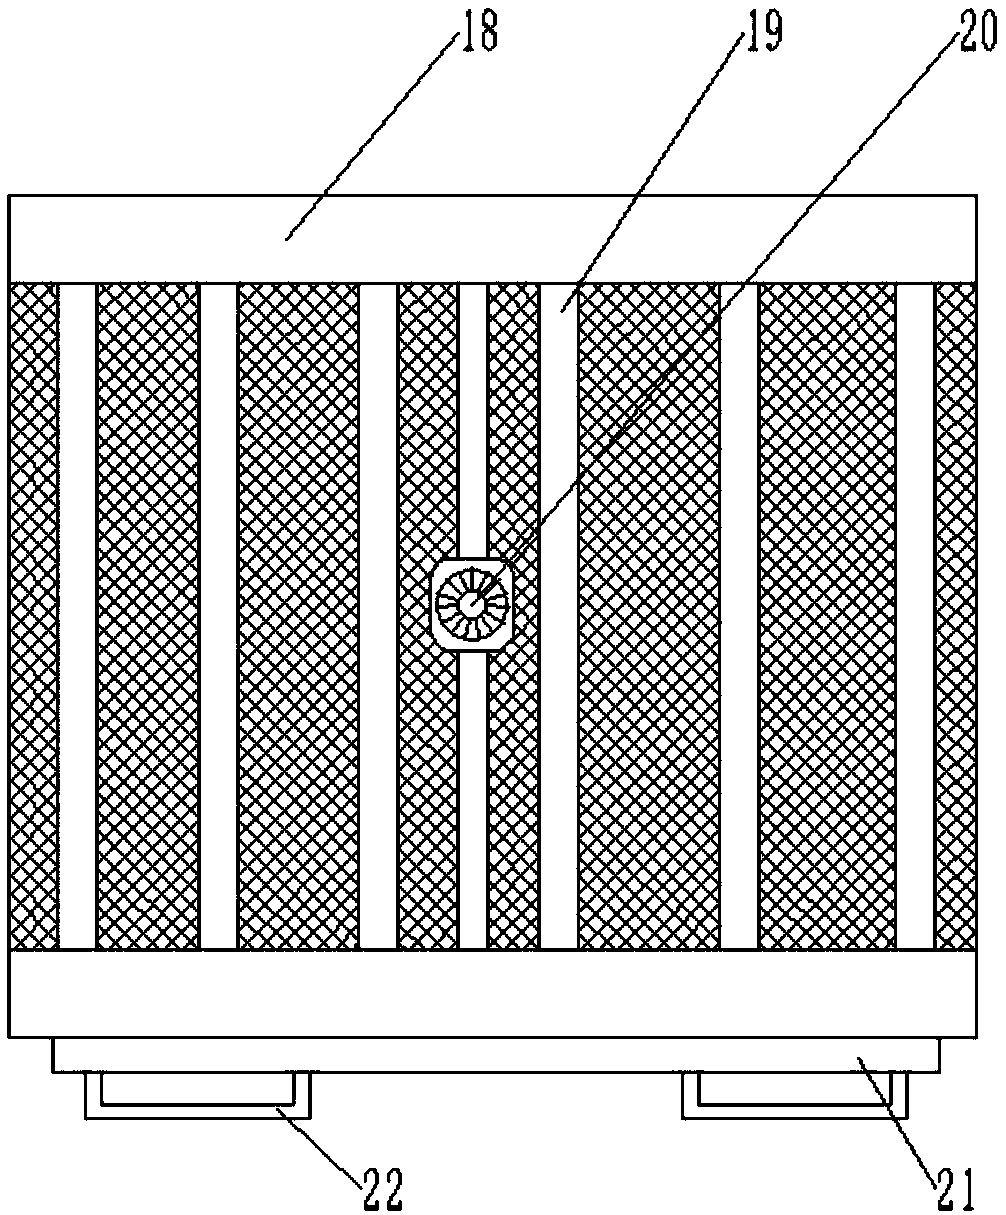 Sunlight drying device capable of going up and down for processing agricultural byproducts